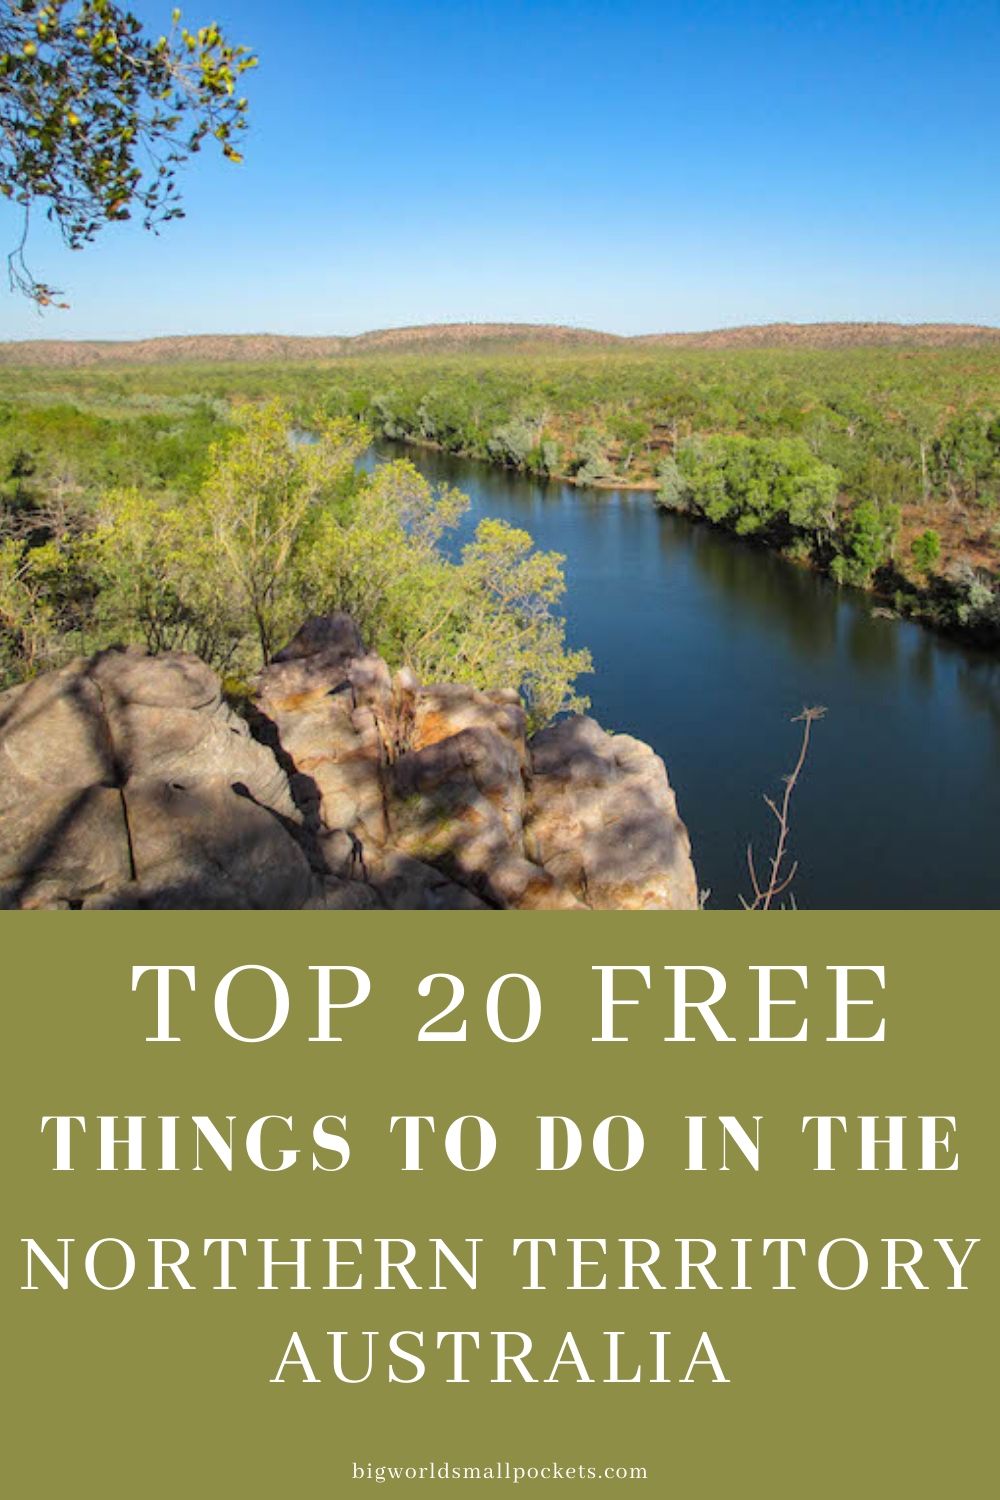 Top 20 Free Things to Do in Australia's Northern Territory